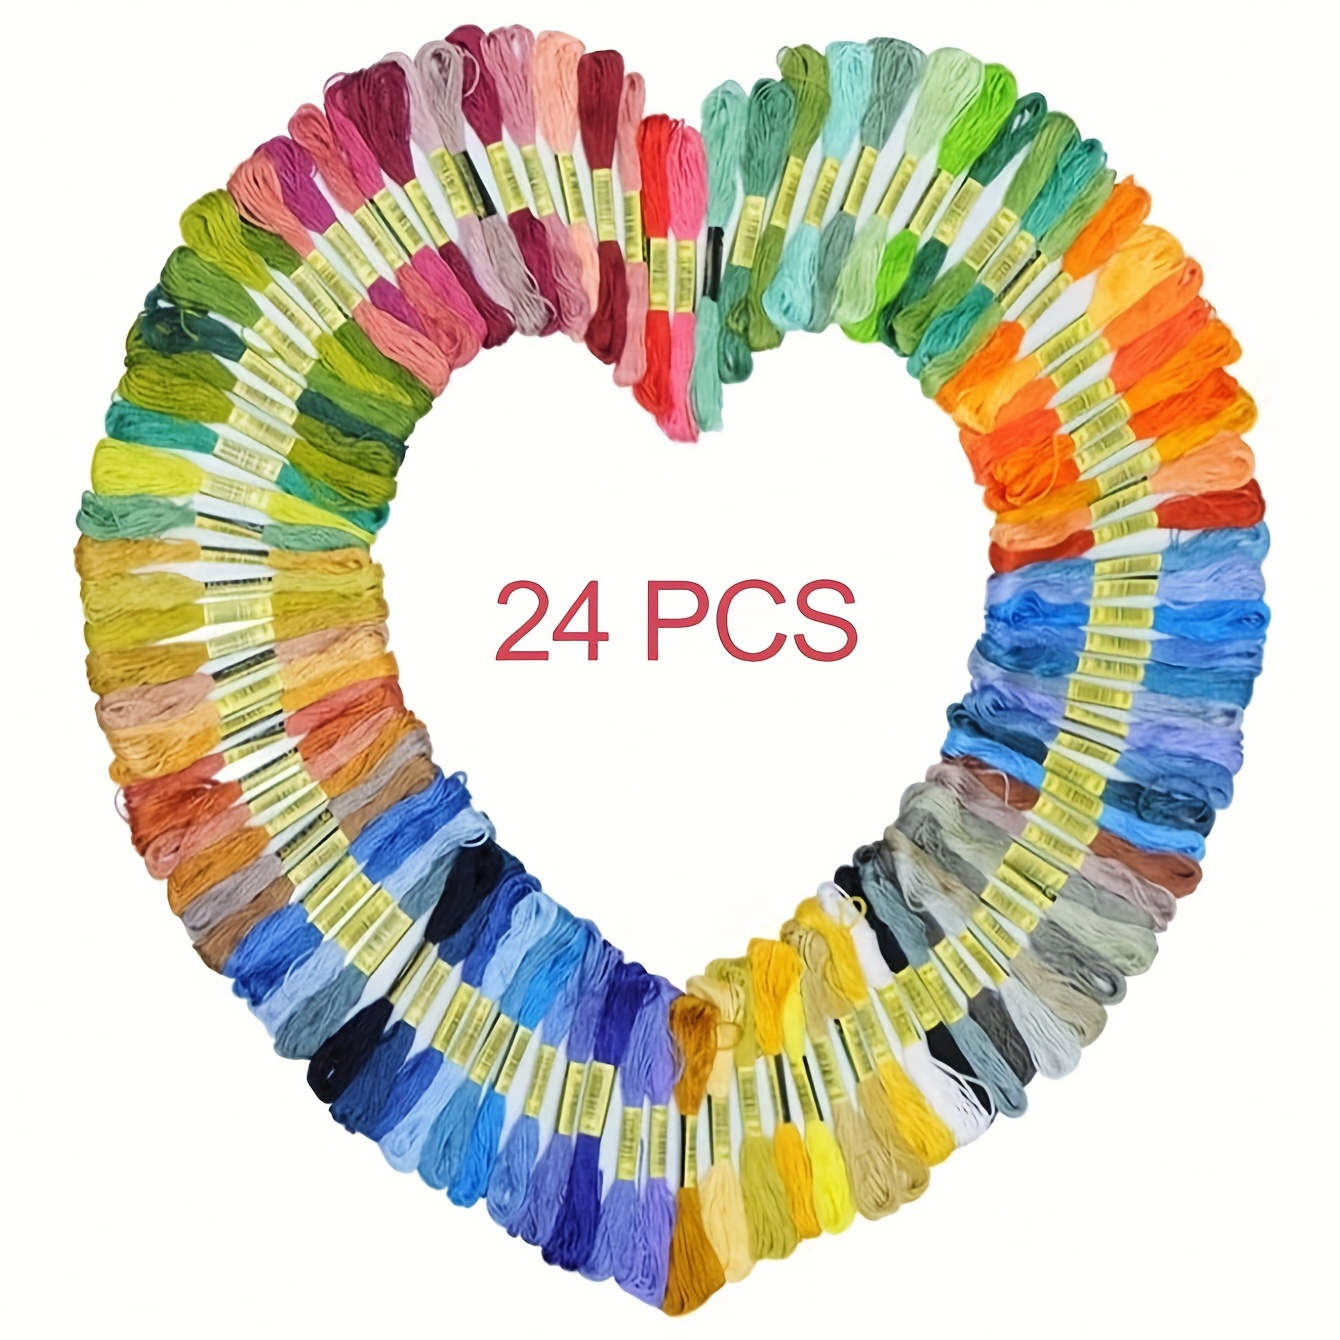 

24/50pcs Colors Rainbow Color Embroidery Floss Embroidery Thread Friendship Bracelet String For Cross Stitch, Hand Embroidery, String Art, Craft Floss